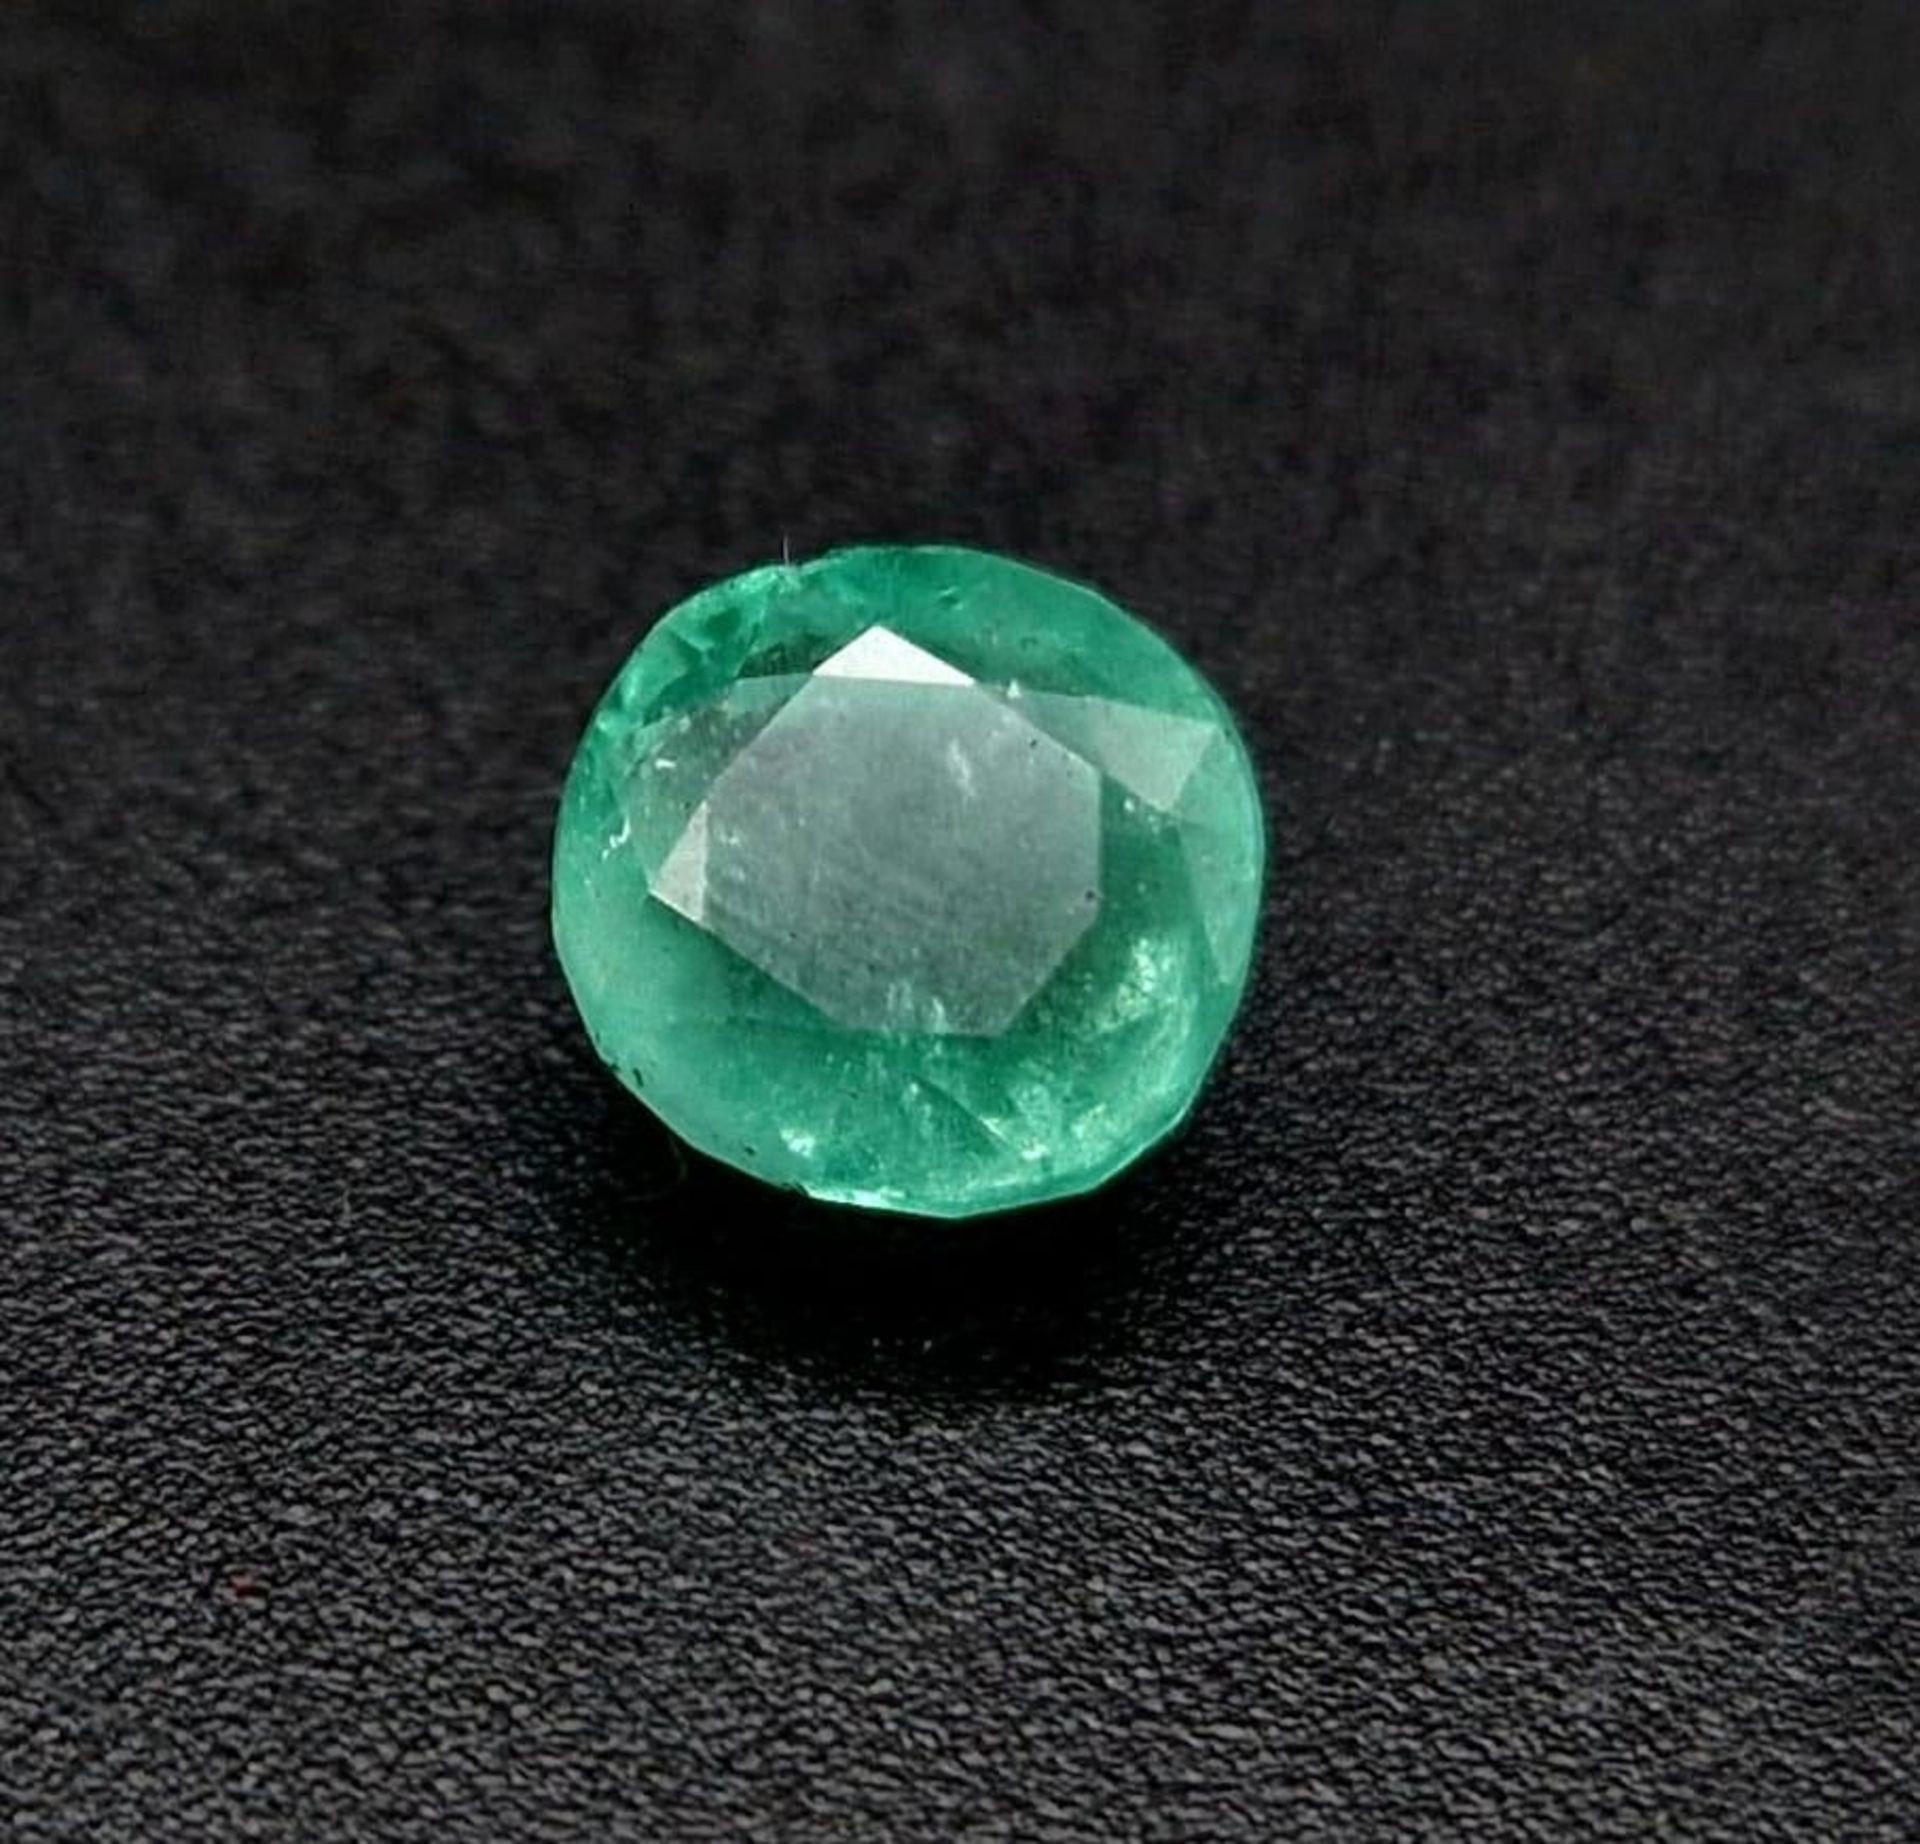 A Rare 2.01ct Oval Cut Emerald from Afghanistan. Untreated, and comes with a GGI certificate.